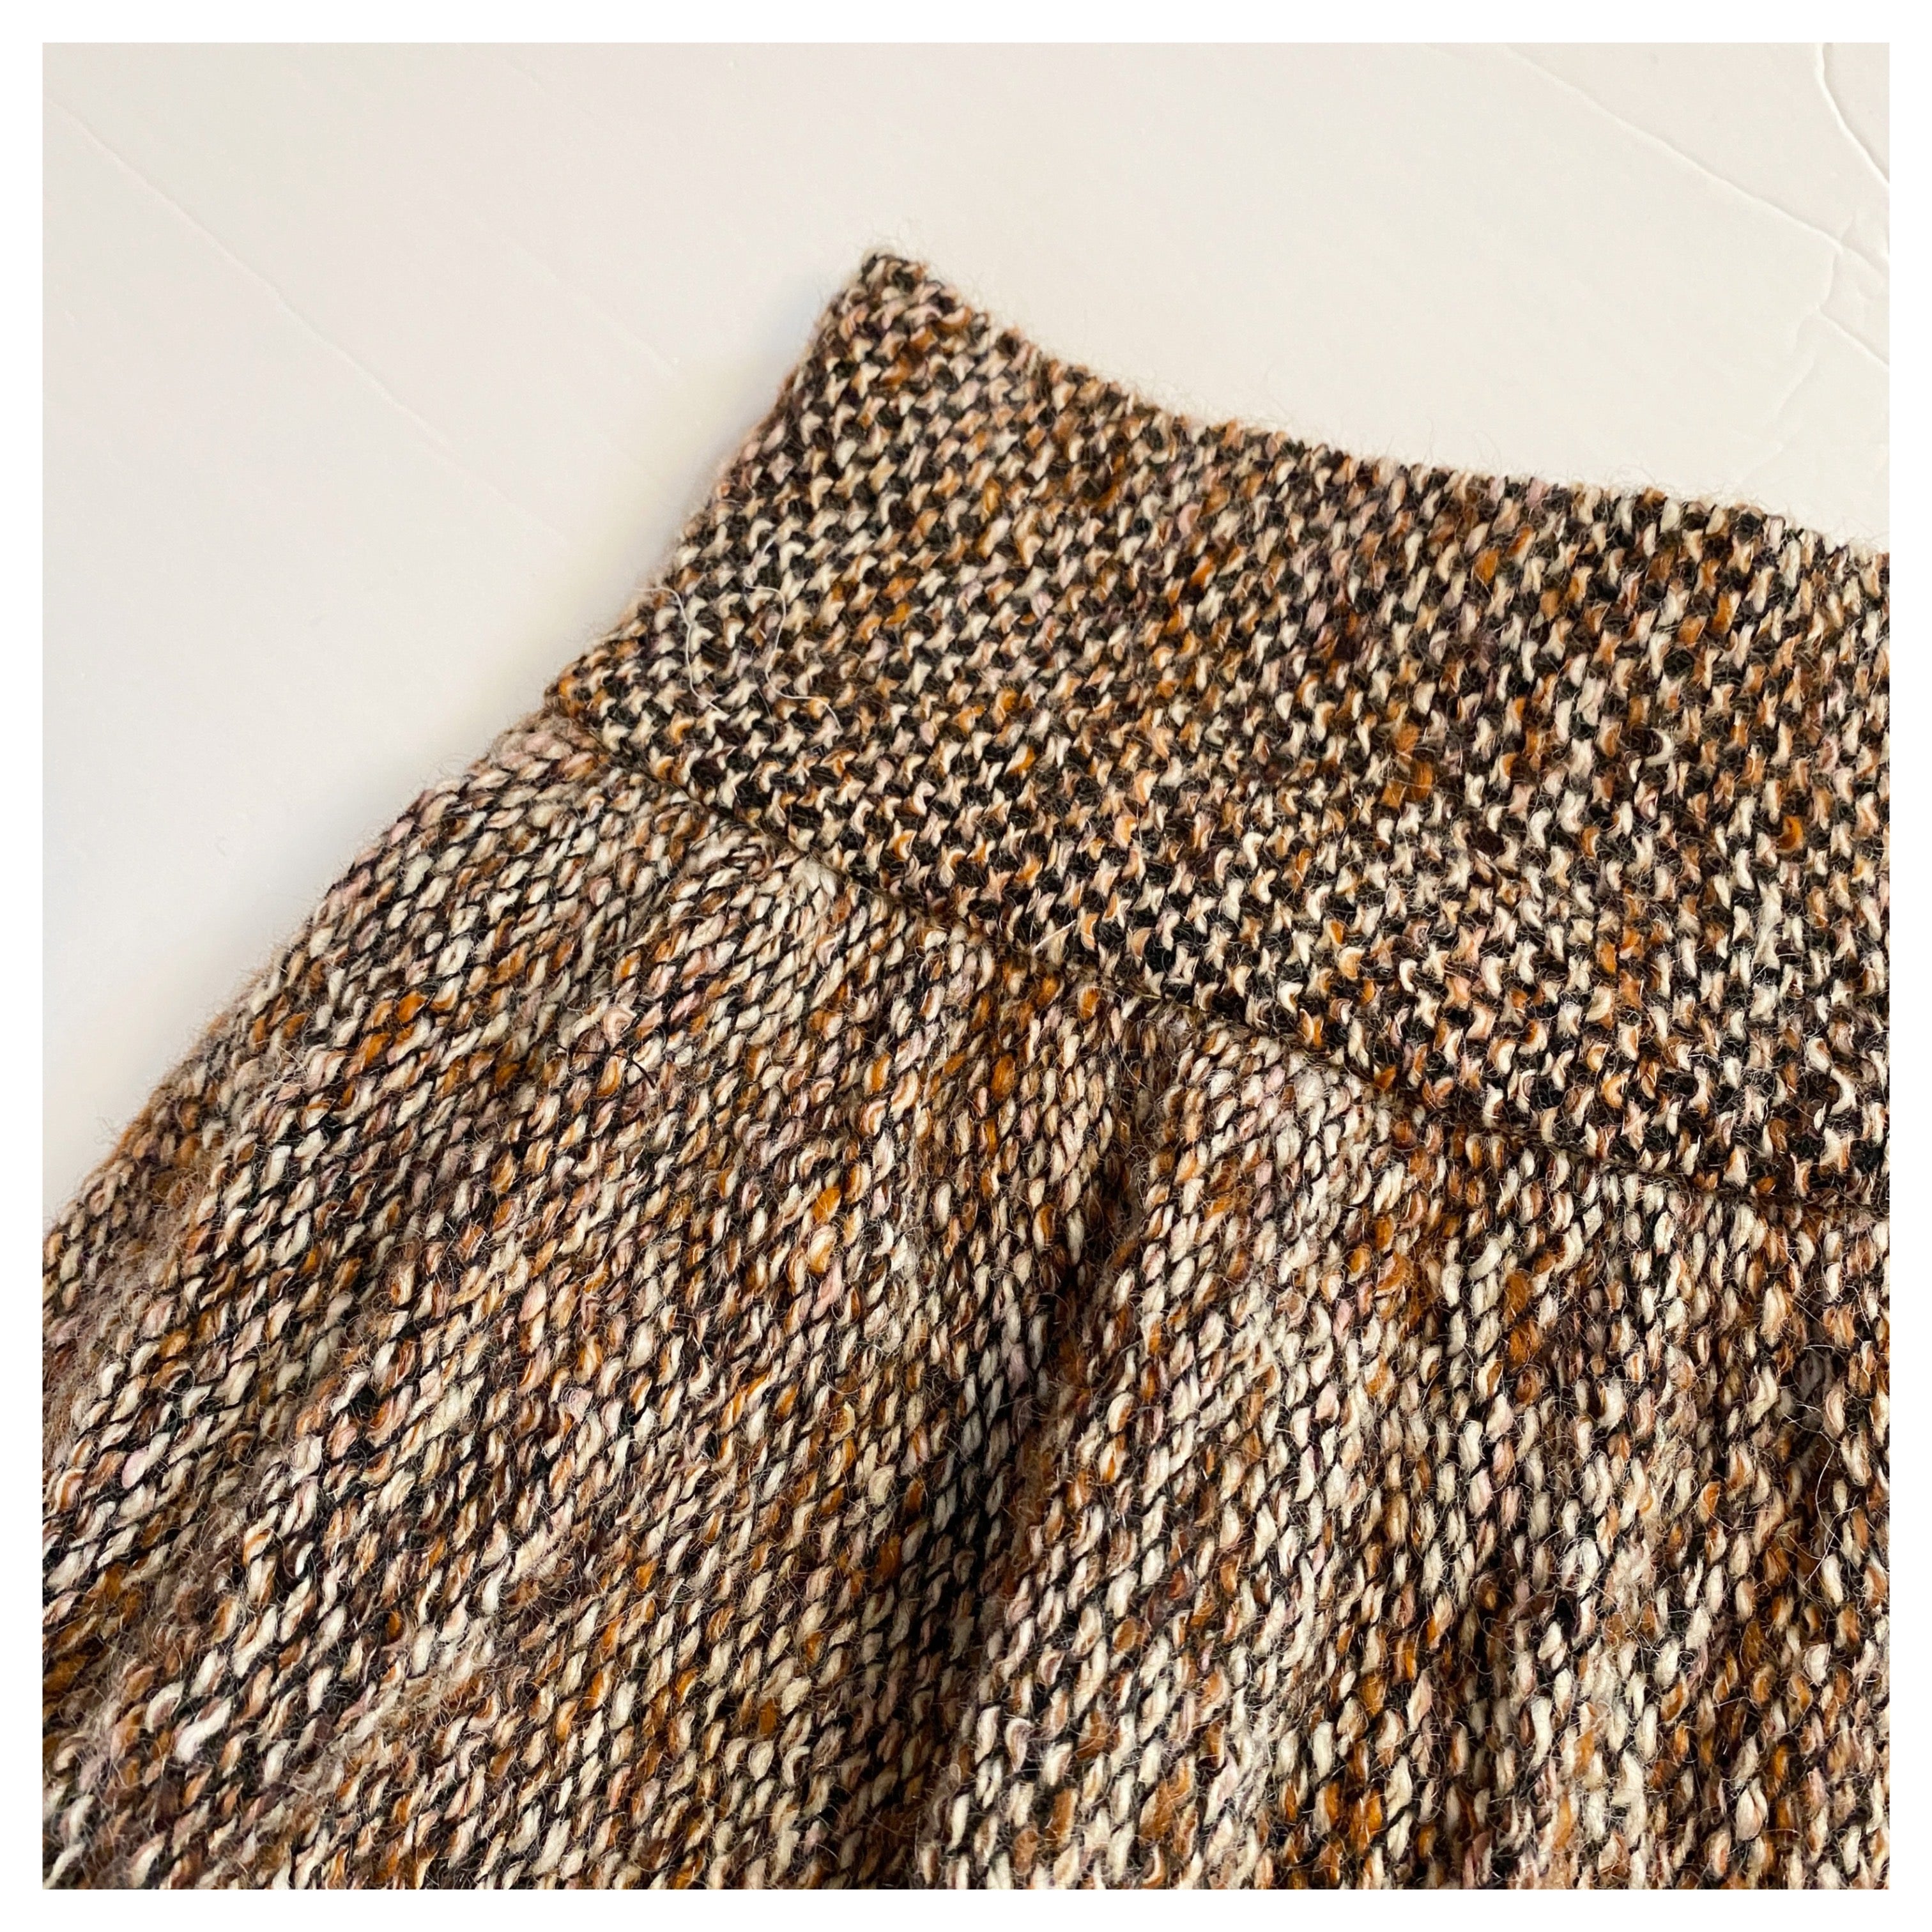 WOOLY MAMOTH TEXTURED SKIRT